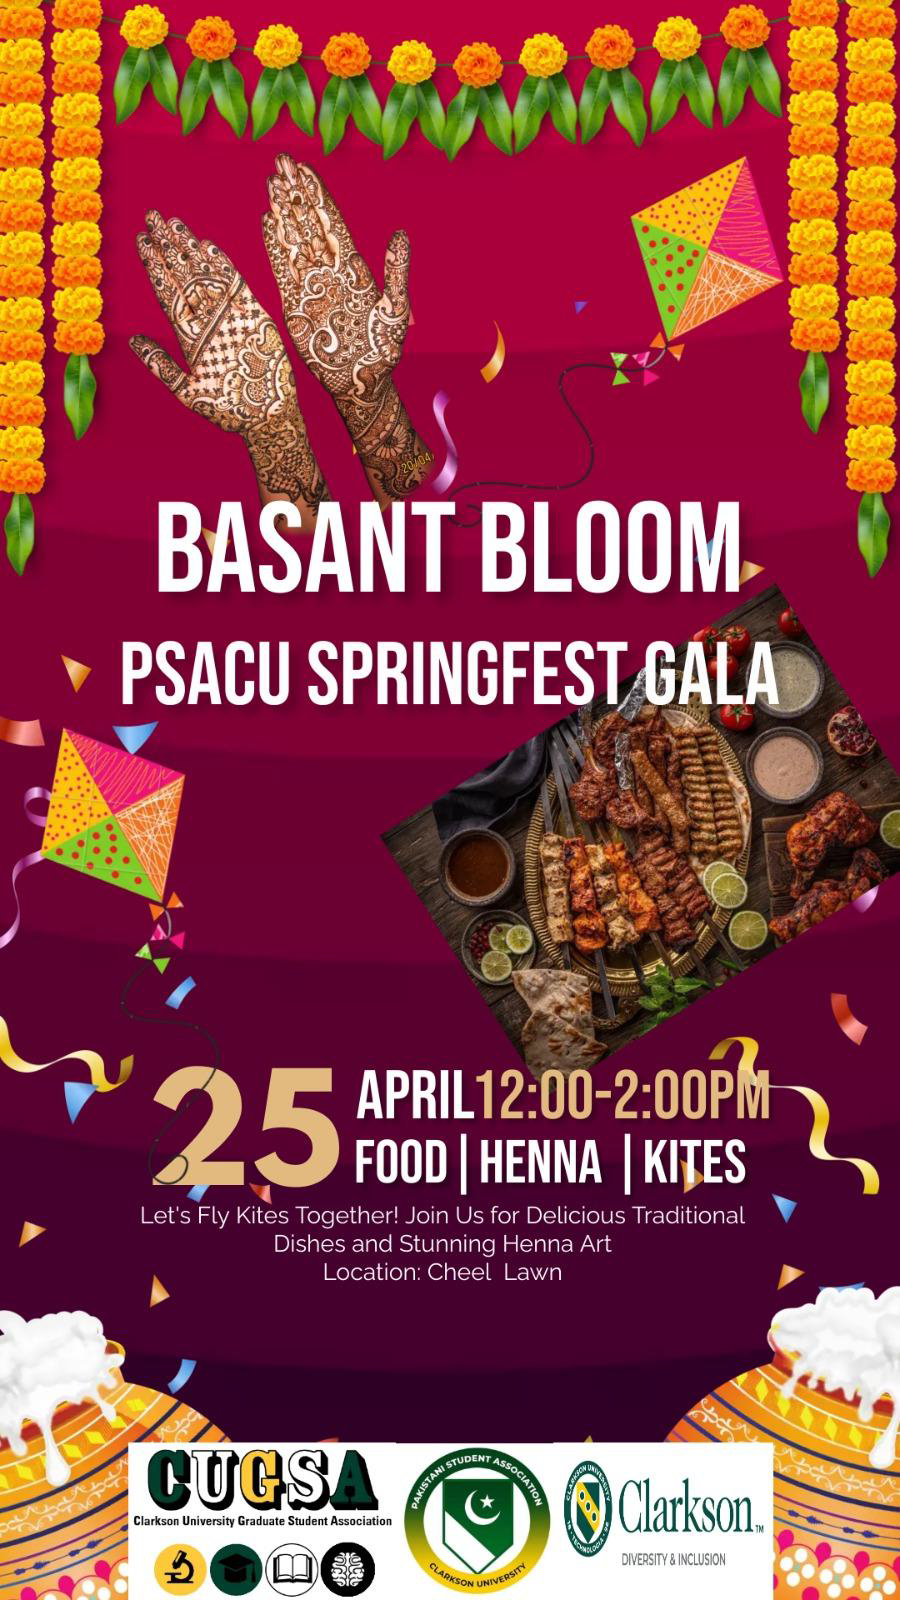 "Announcement for the PSACU Basant festival on April 25th from 12:00 PM to 2:00 PM, celebrating the arrival of spring. Highlights include kite flying, with colorful kites filling the sky, symbolizing freedom and the spirit of the season. The festival features stalls serving traditional foods and a henna tattoo stall offering intricate designs that symbolize joy and good luck. This event celebrates cultural traditions and fosters community spirit."